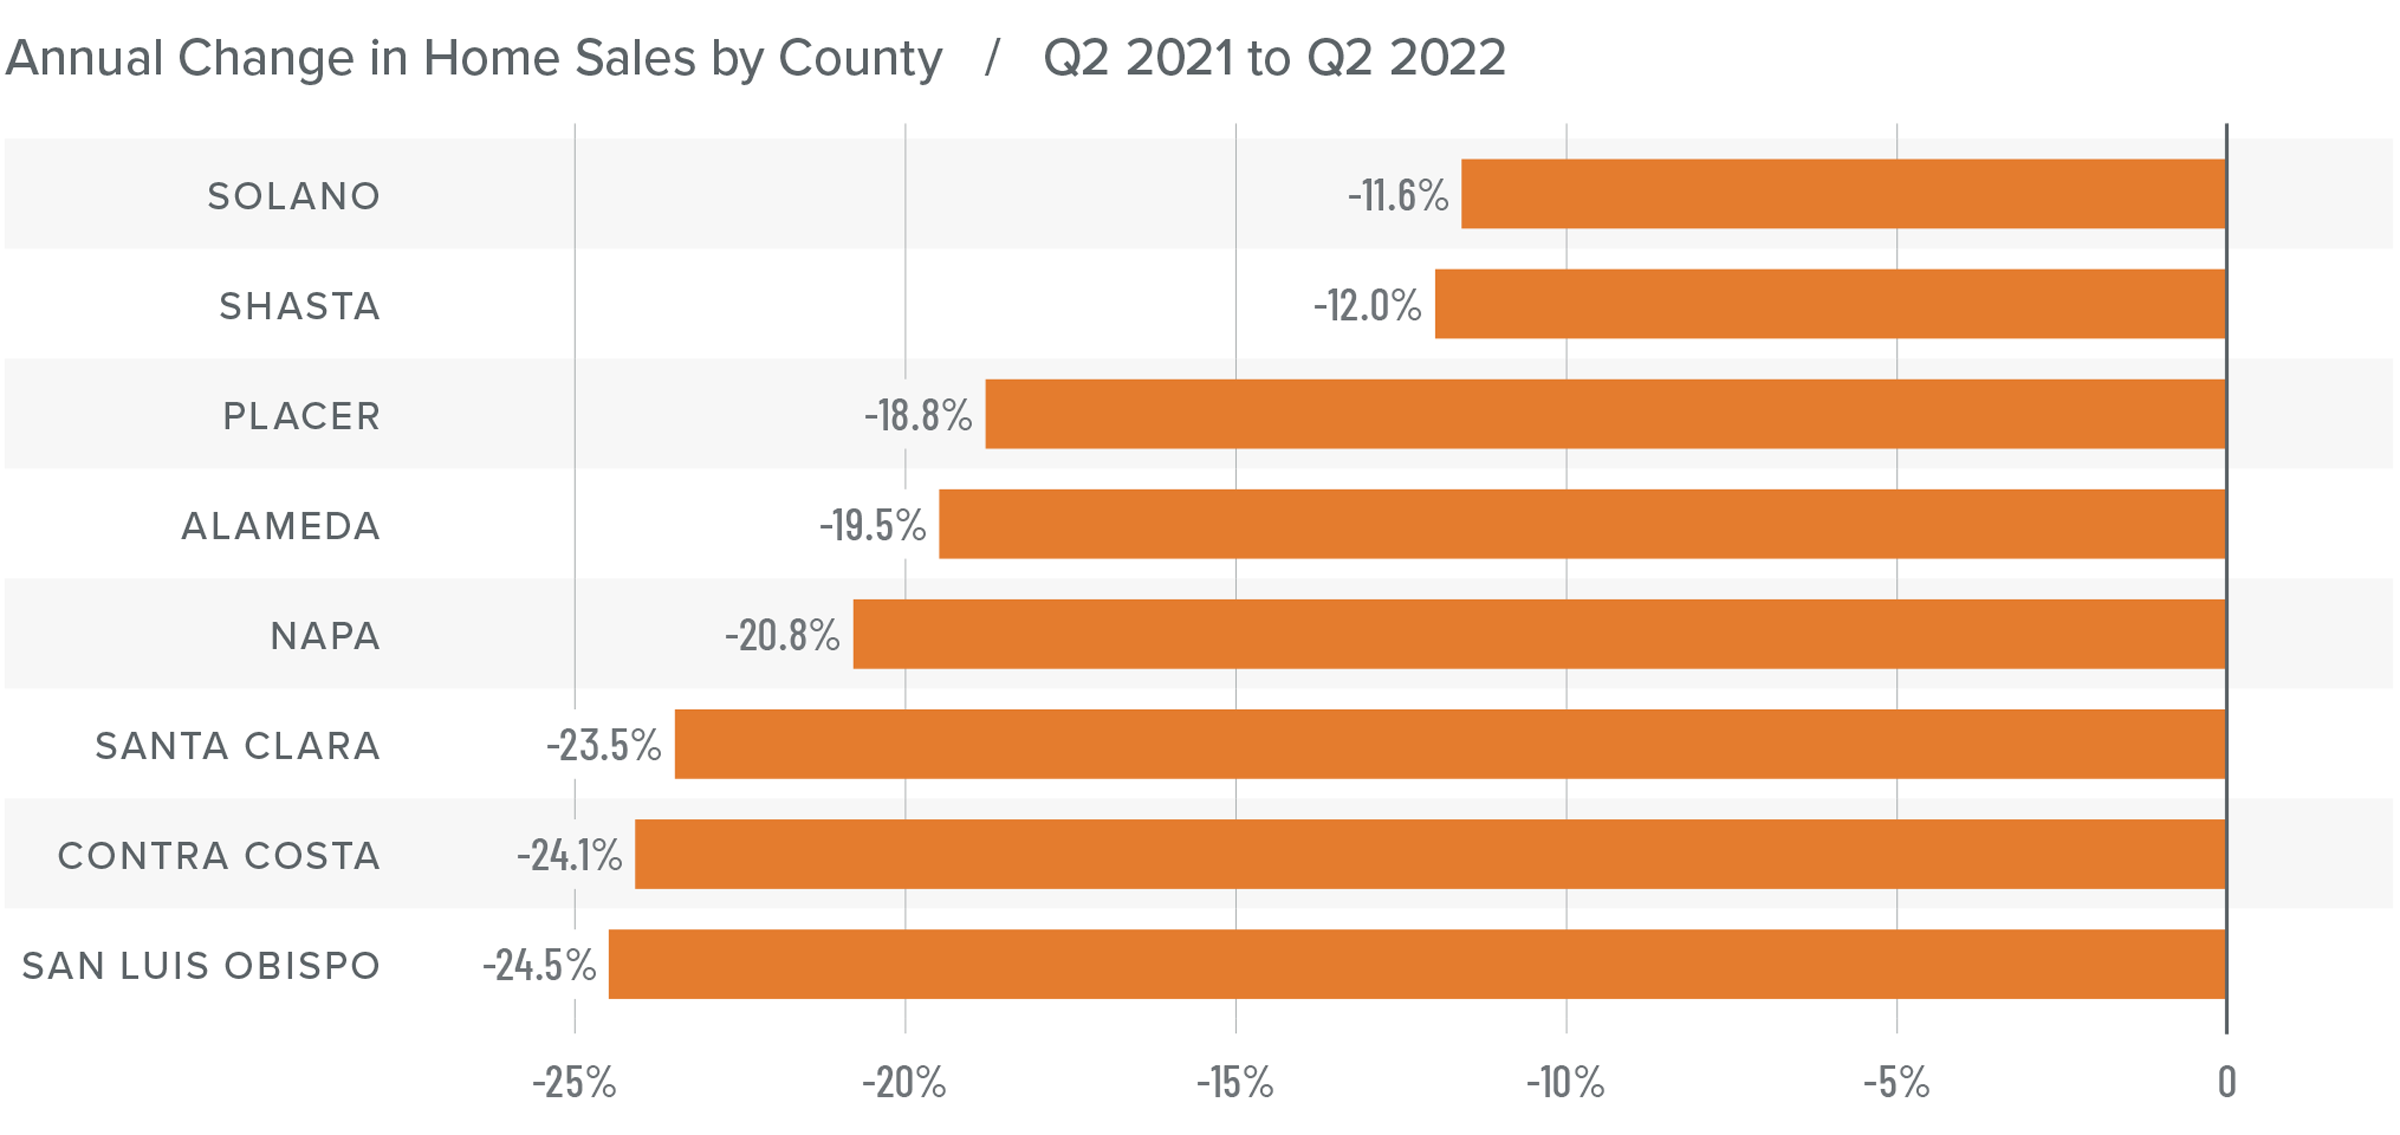 A bar graph showing the annual change in home sales for various counties in Northern California from Q2 2021 to Q2 2022. All counties listed showed a negative year-over-year percentage change. Solano County had a -11.6%% change, followed by Shasta at -12%, Placer at -18.8%, Alameda at -19.5%, Napa at -20.8%, Santa Clara at -23.5%, Contra Costa at -24.1%, and San Luis Obispo at -24.5%.